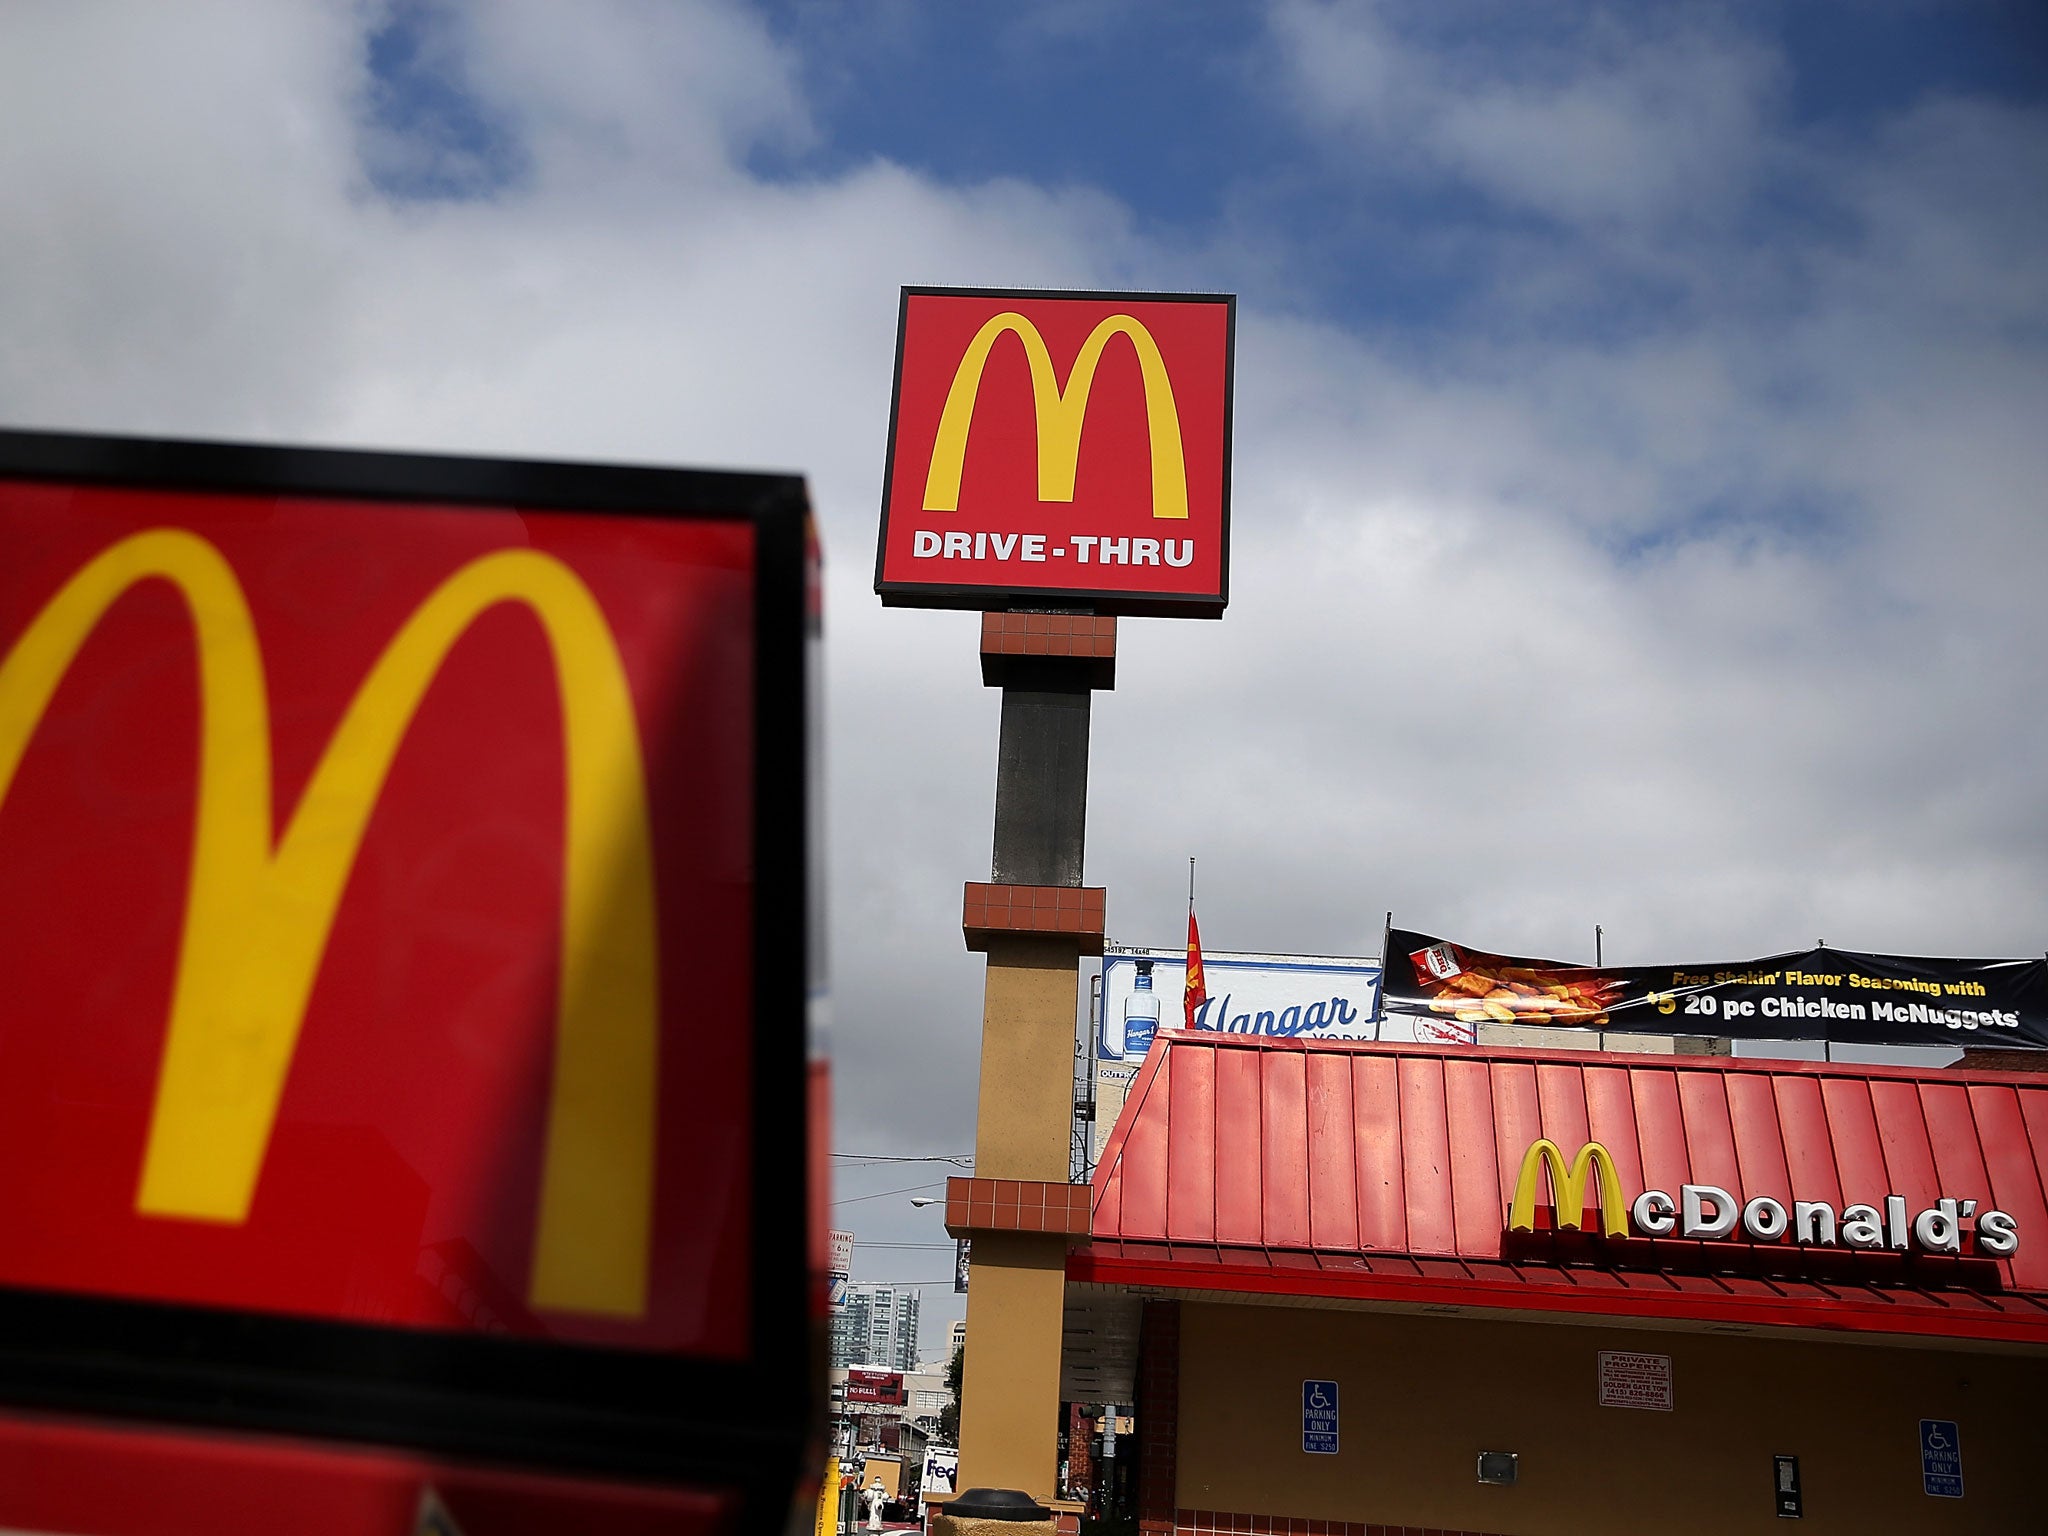 A job at McDonald's can be a stepping stone to significantly higher profile gigs